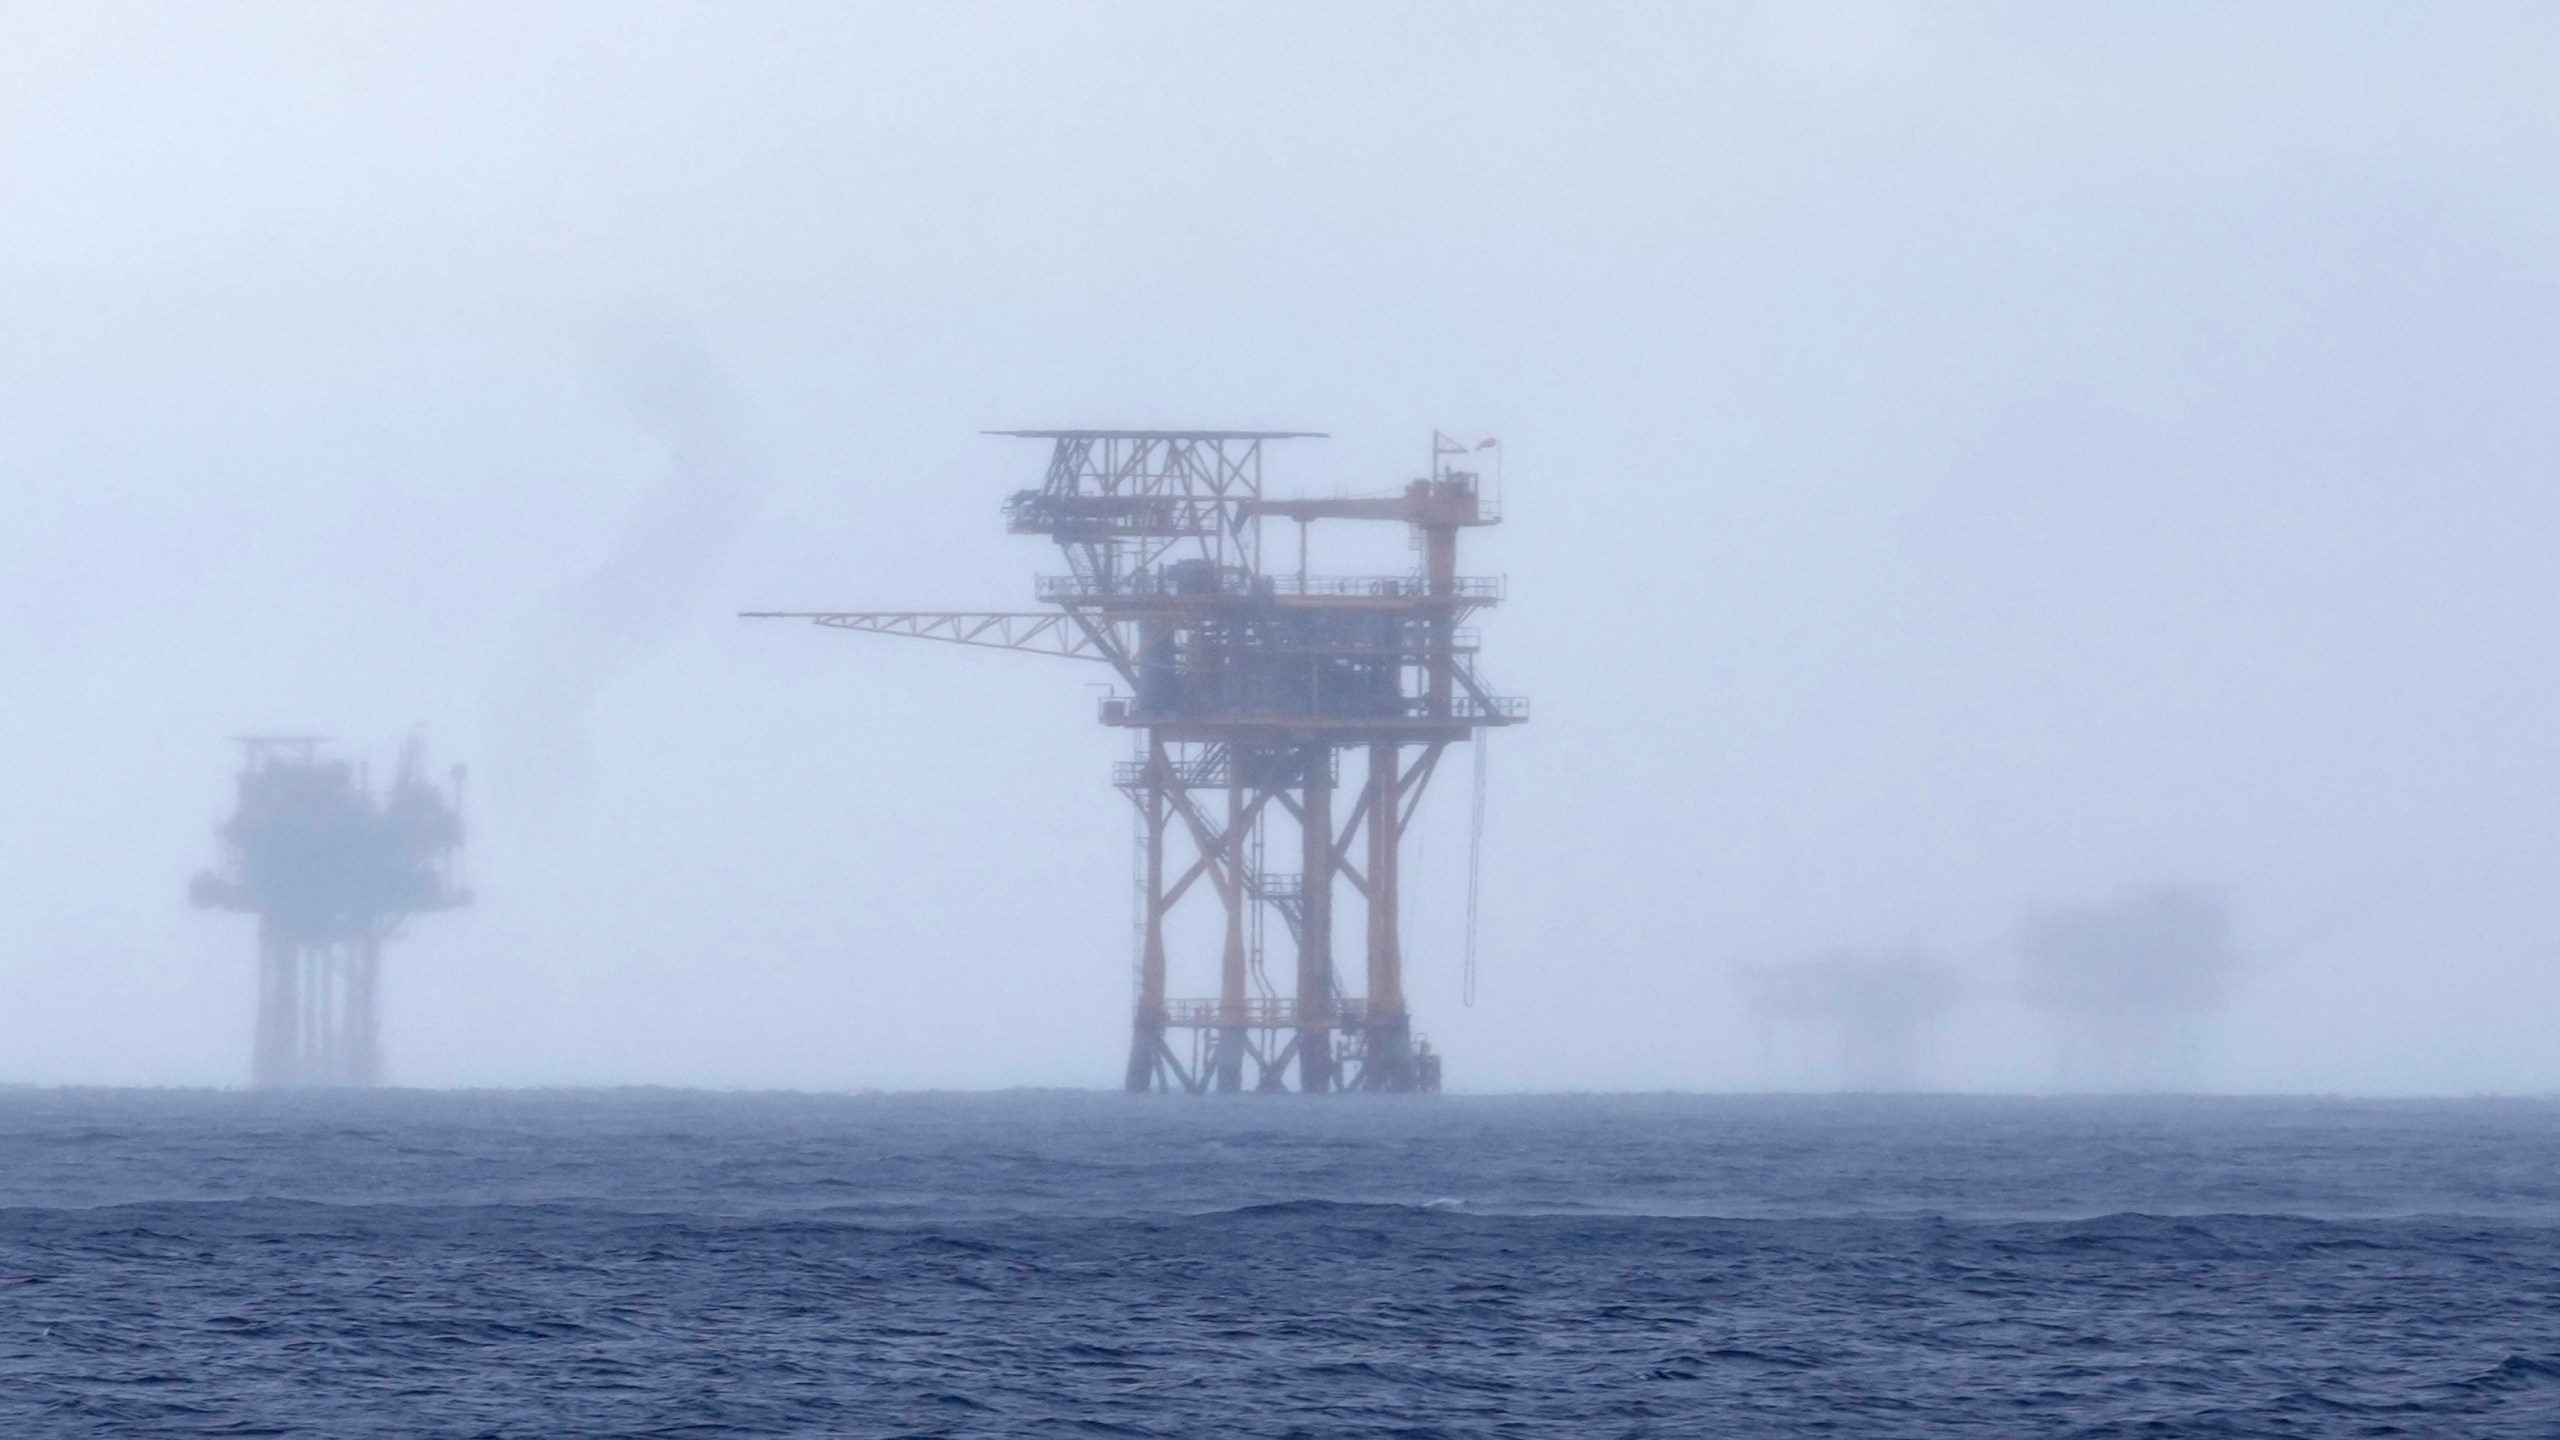 CORRECTS TO 382 MILLION NOT 328 FILE - Oil platforms are visible through the haze near the Flower Garden Banks National Marine Sanctuary in the Gulf of Mexico, off the coast of Galveston, Texas, Sept. 16, 2023. Oil companies offered $382 million for drilling leases in the Gulf Wednesday after courts rejected the Biden administration's plans to scale back the sale to protect an endangered whale species. (AP Photo/LM Otero, file)